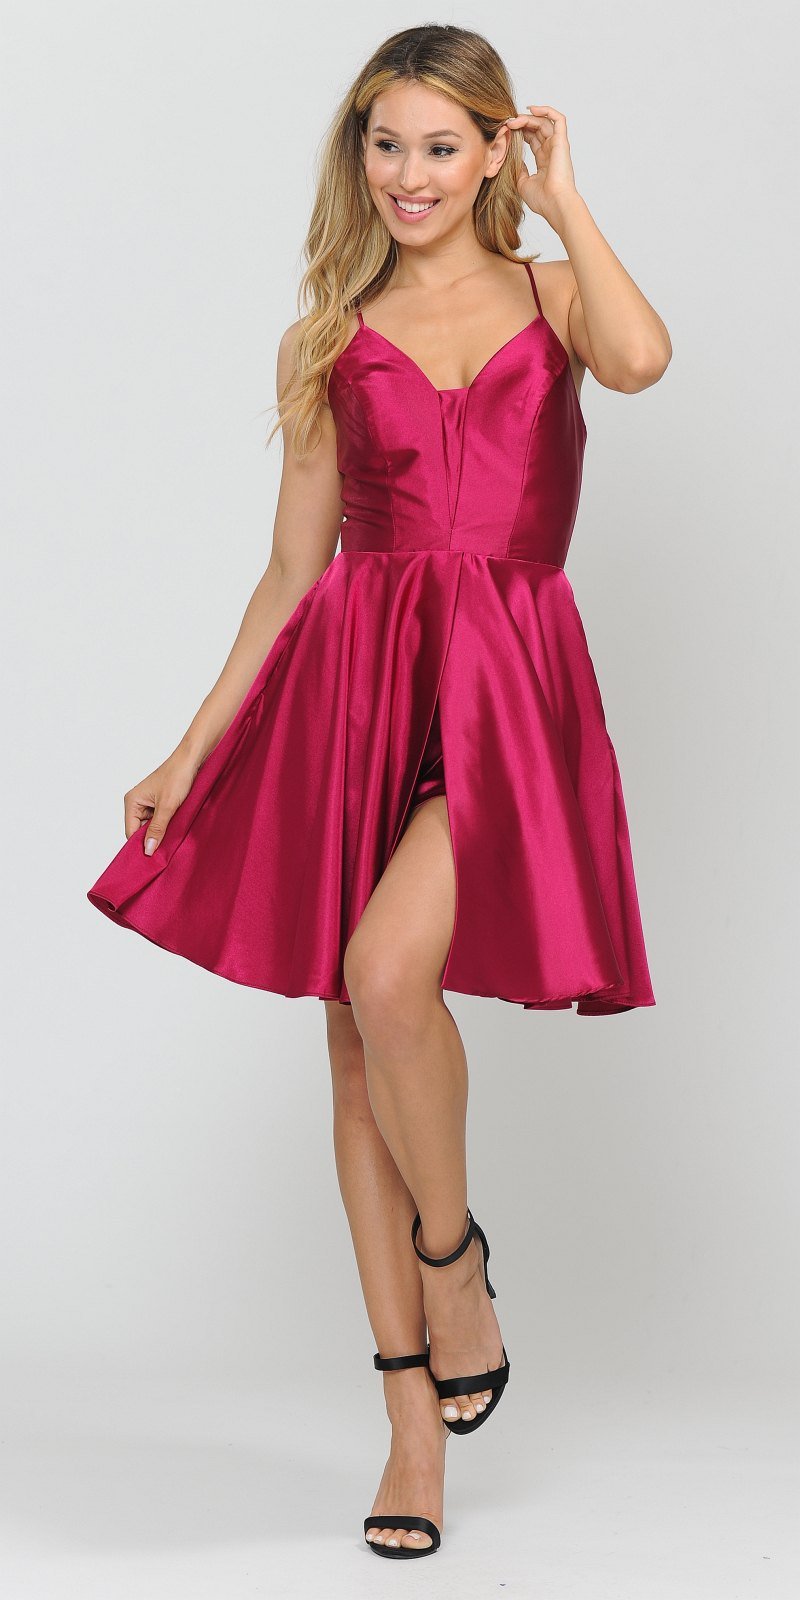 Poly USA 8542 Romper Style Short Homecoming Dress Magenta